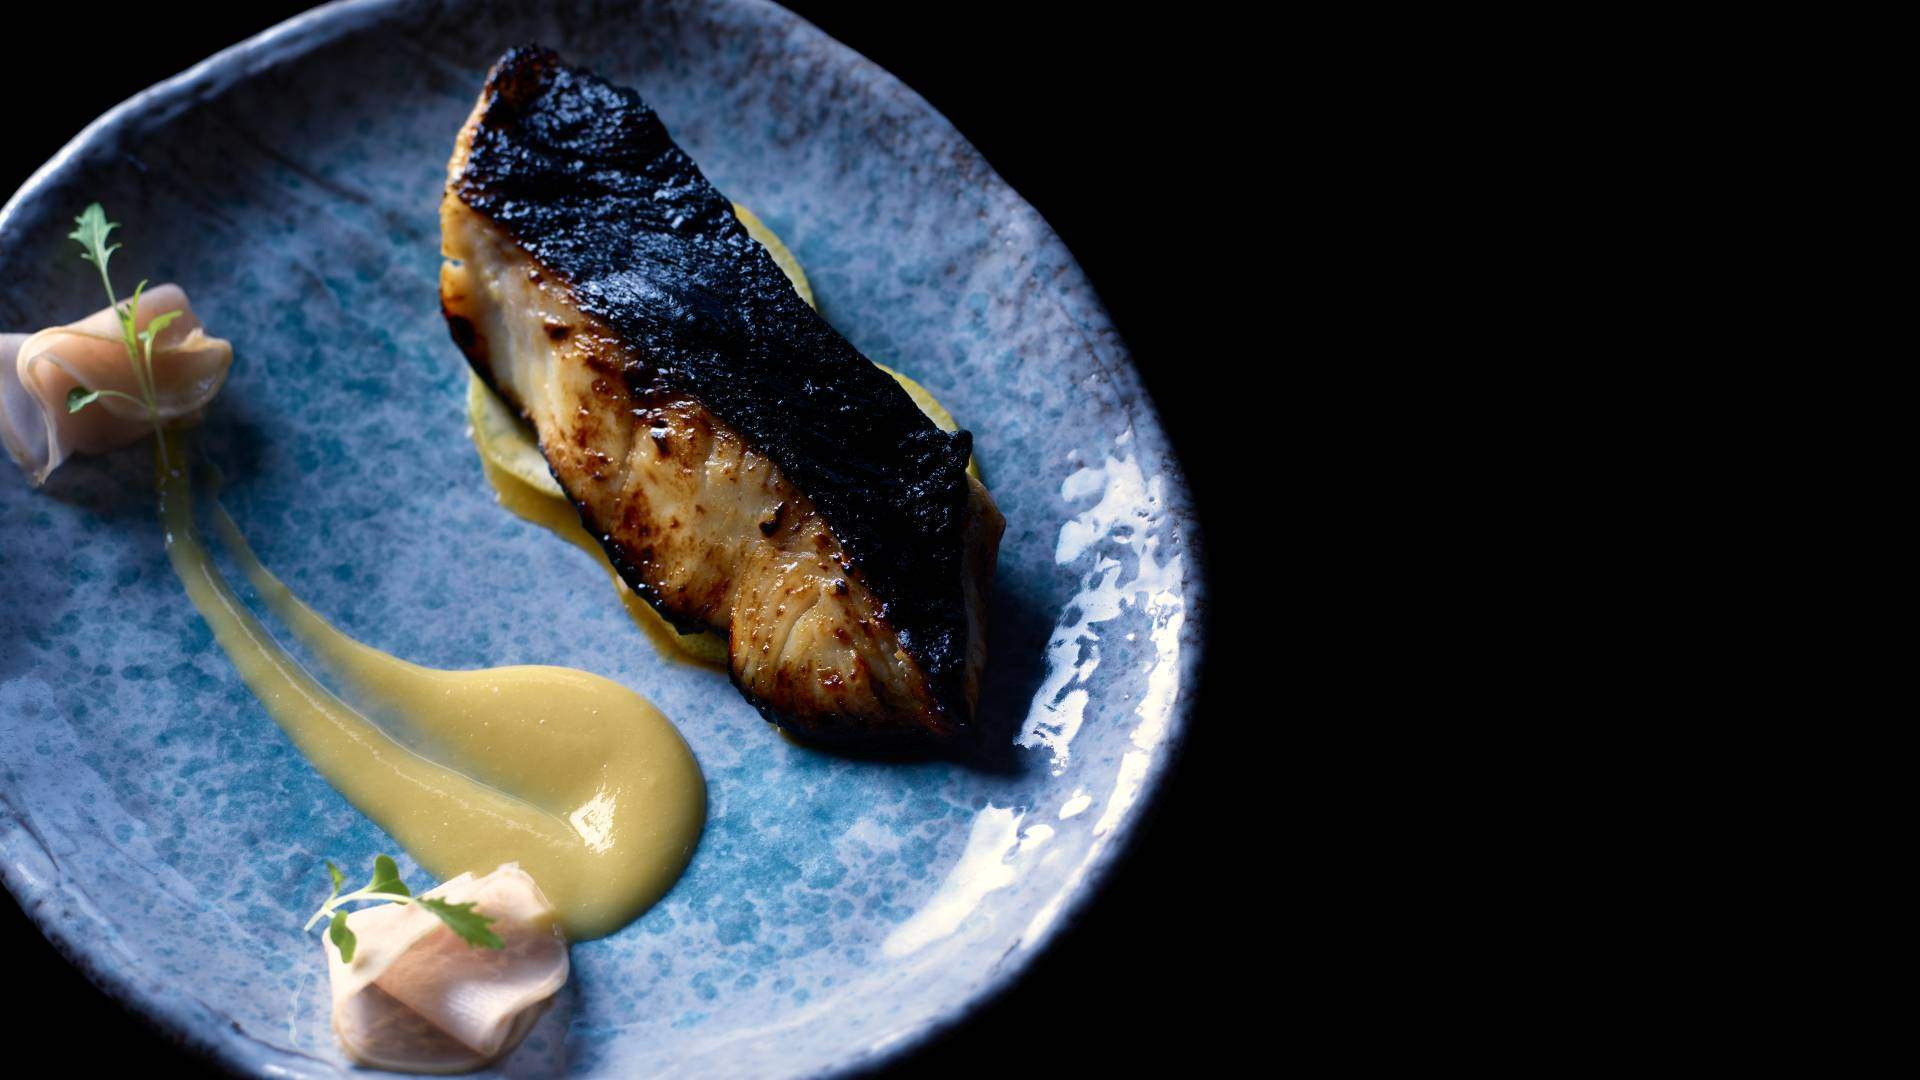 Coming Soon: Contemporary Japanese Restaurant TOKO Is Set to Reopen in a New George Street Home This September